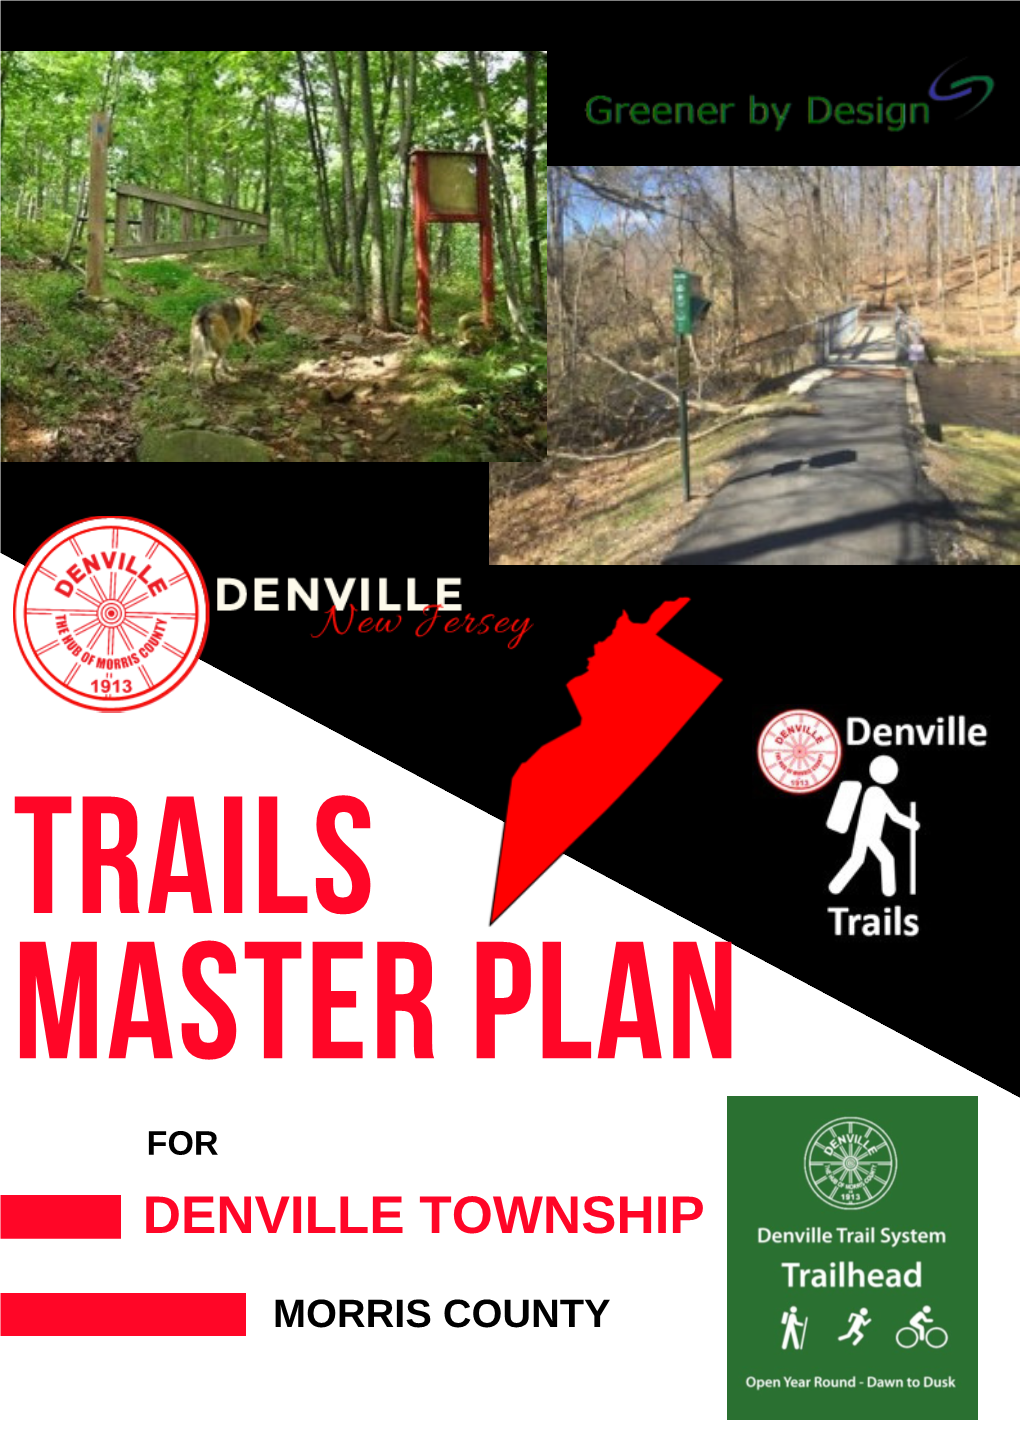 Denville Trails Master Plan Is the Result of Significant Community Participation